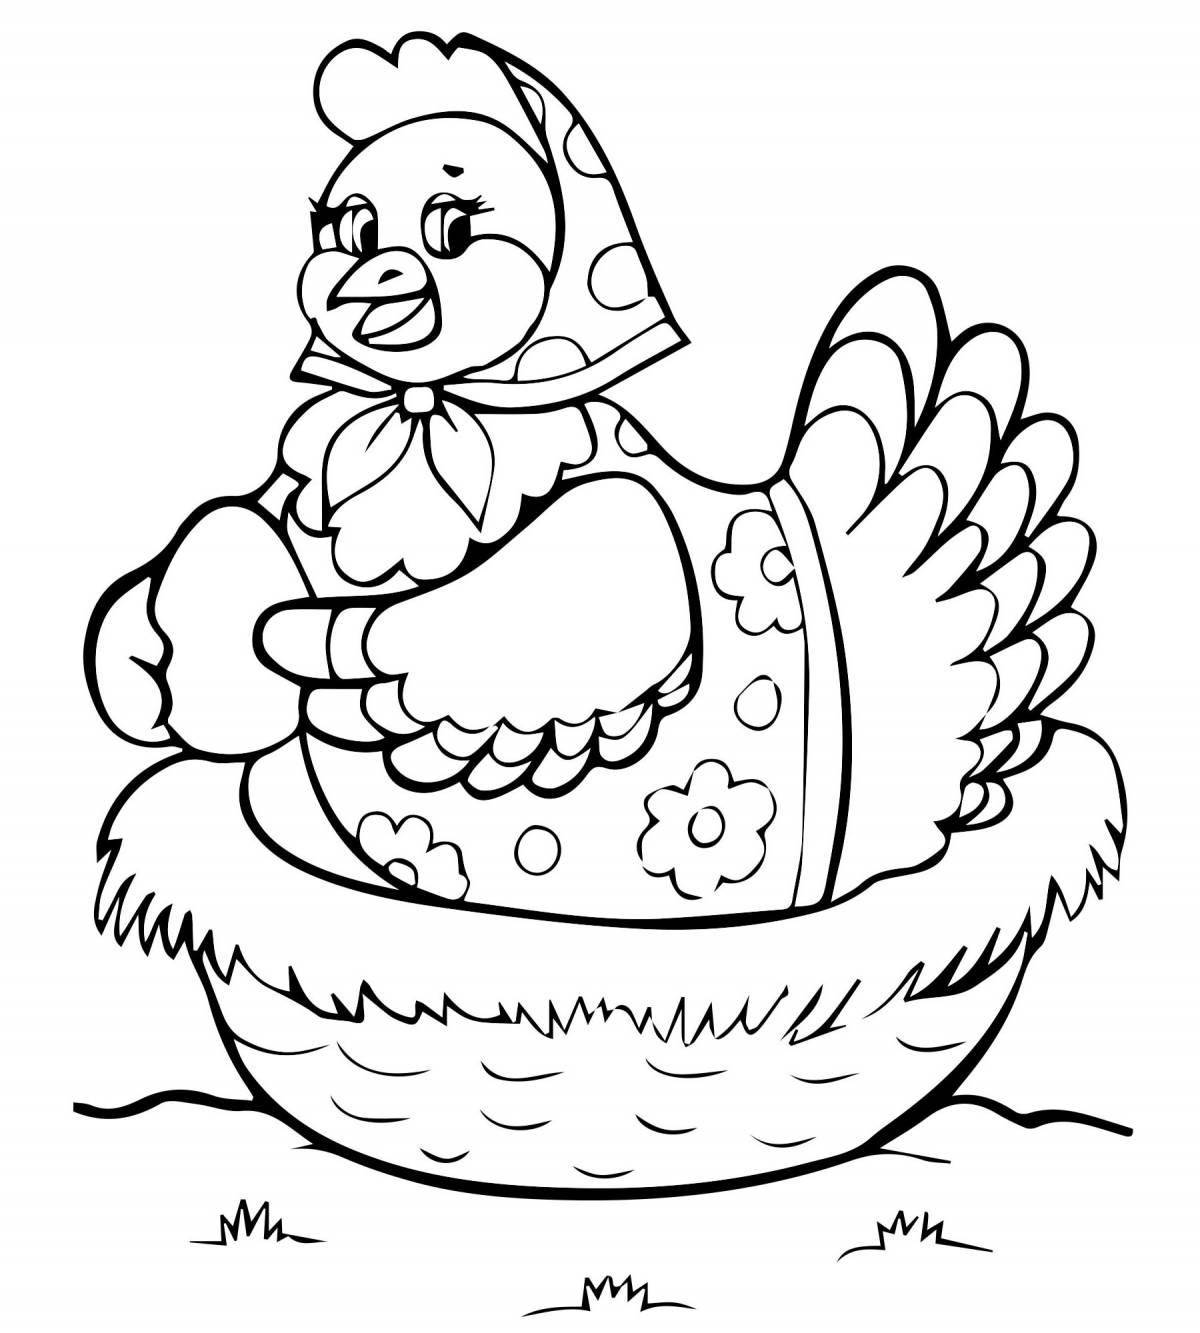 Adorable chick coloring book for kids